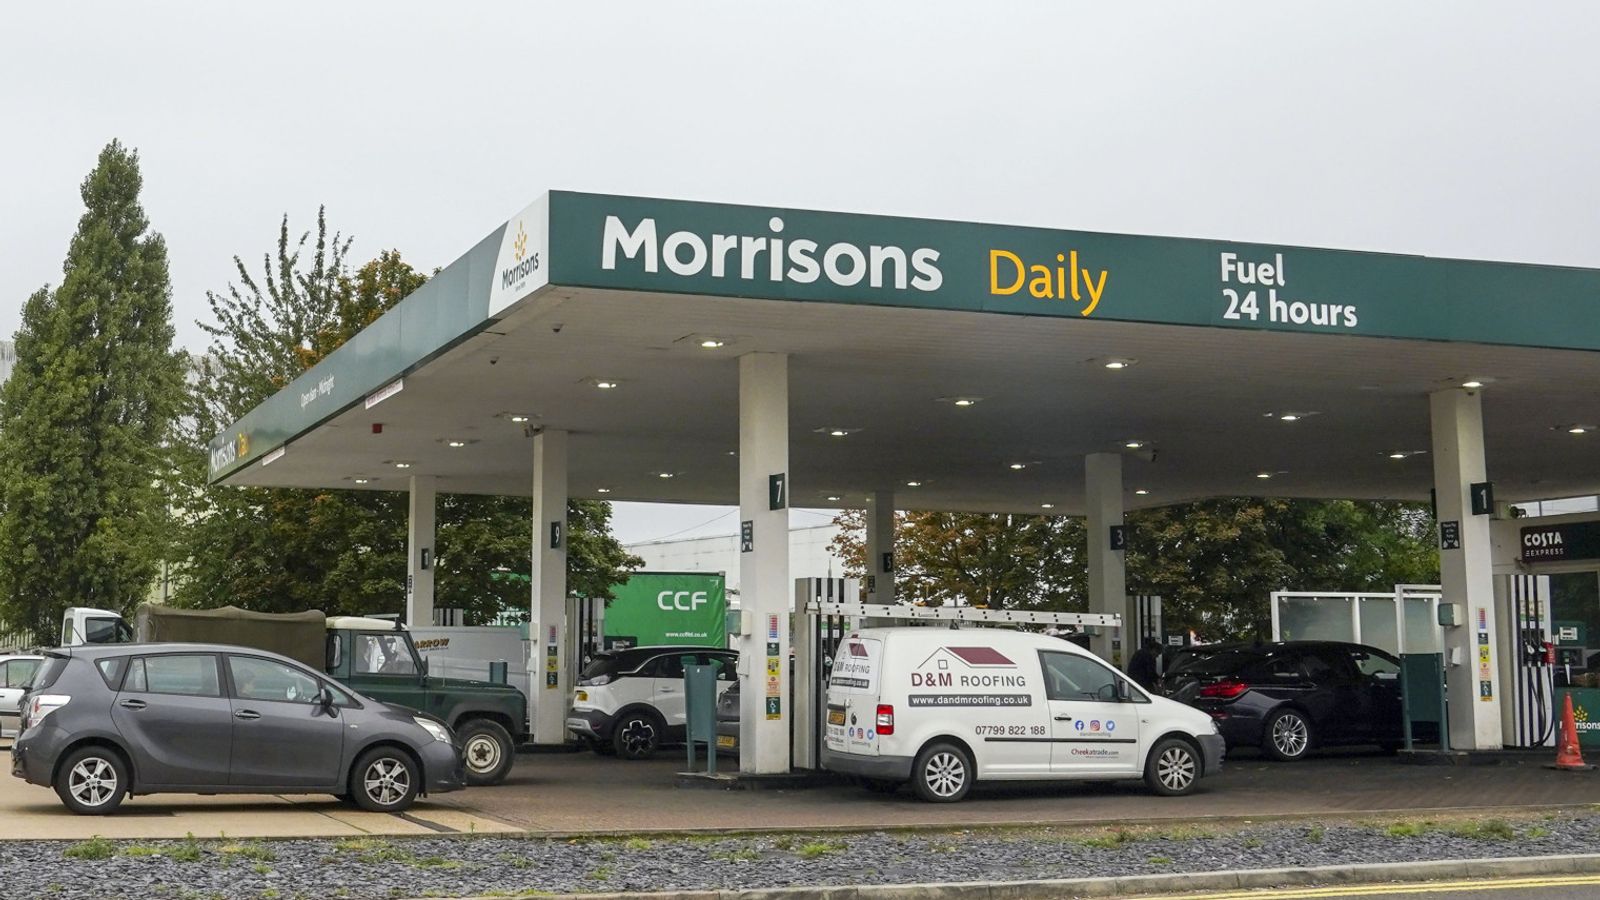 cd&r-backed motor fuel group closes in on £2.5bn morrisons deal